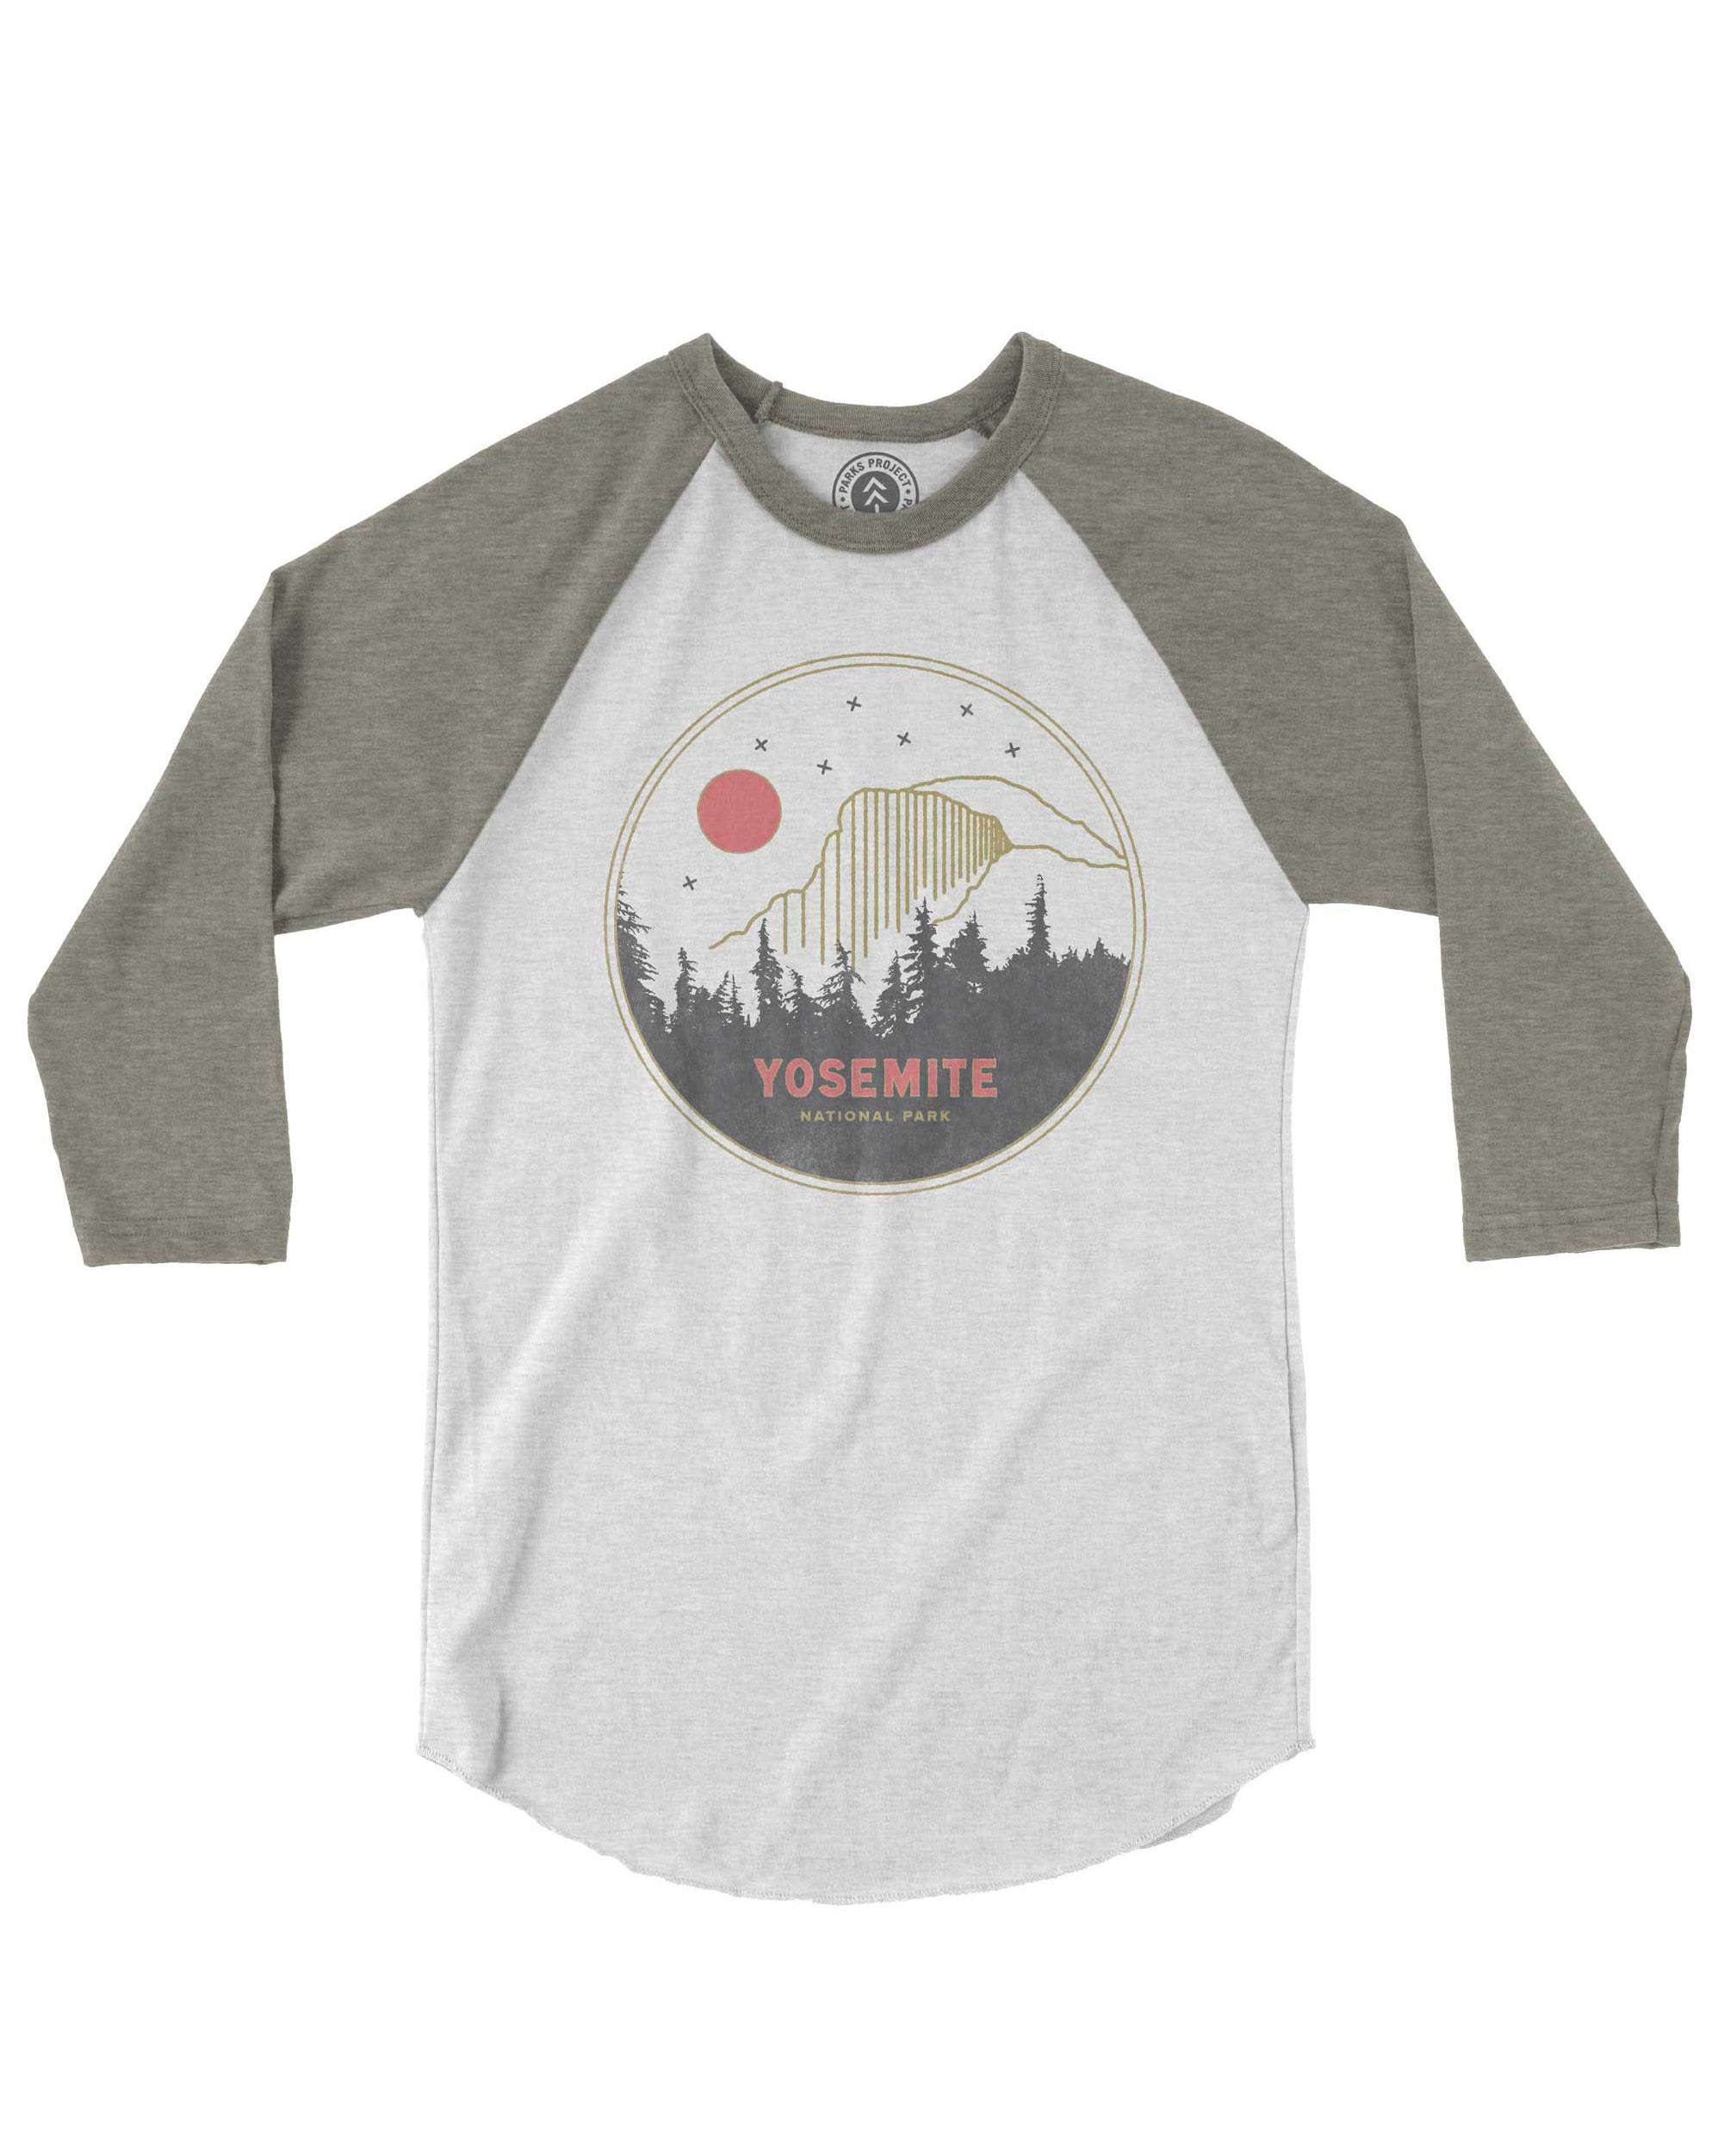 Holiday Gift Guide for National Park Lovers - Yosemite Raglan